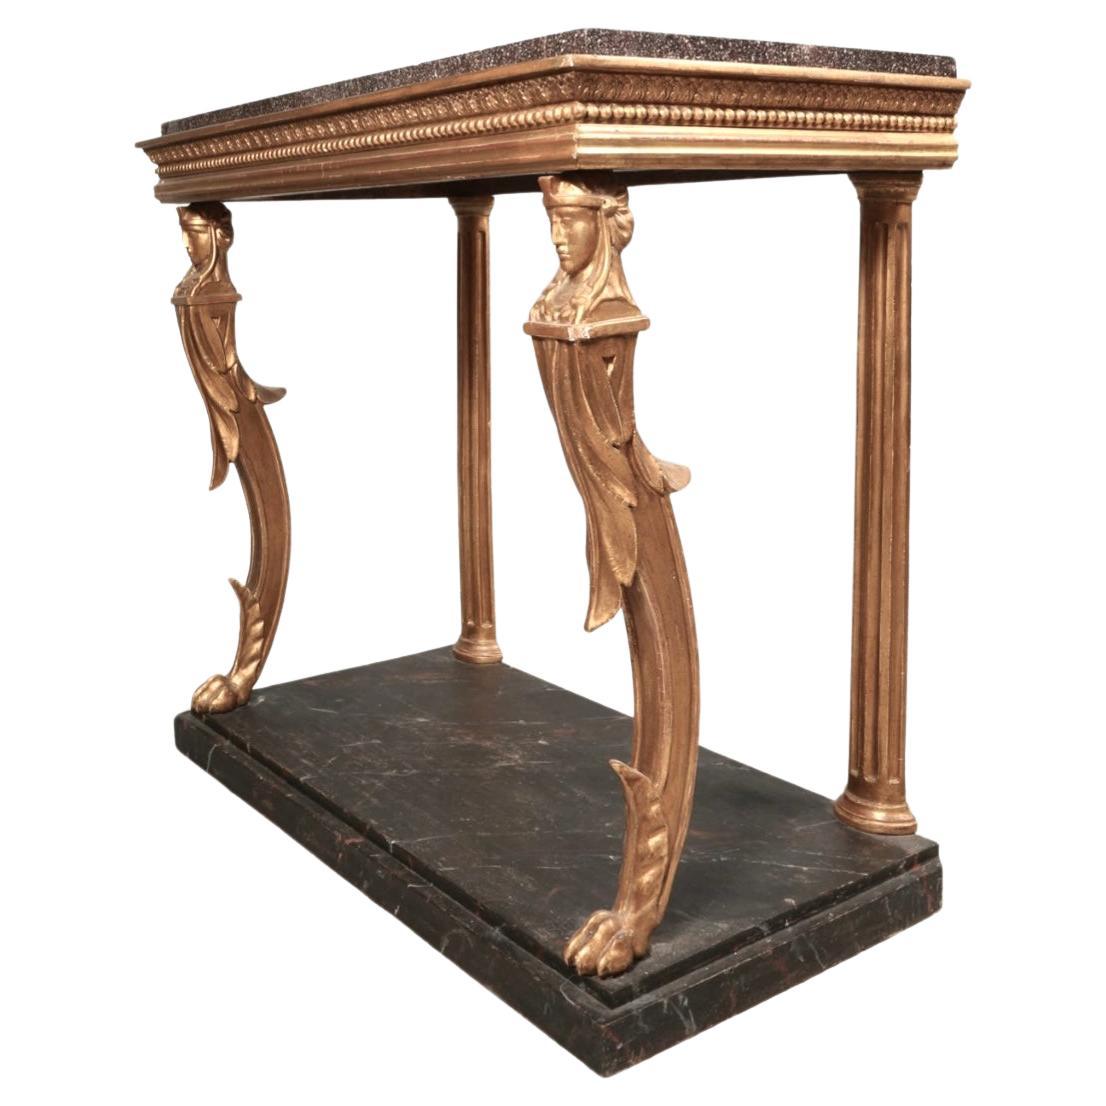 Elegant 19th century Swedish Neoclassical painted and parcel gilt console table with marble top. Front gilded leg supports feature heads of Greek men along paw feet. Console features inset rectangular porphyry top above beaded frieze raised on